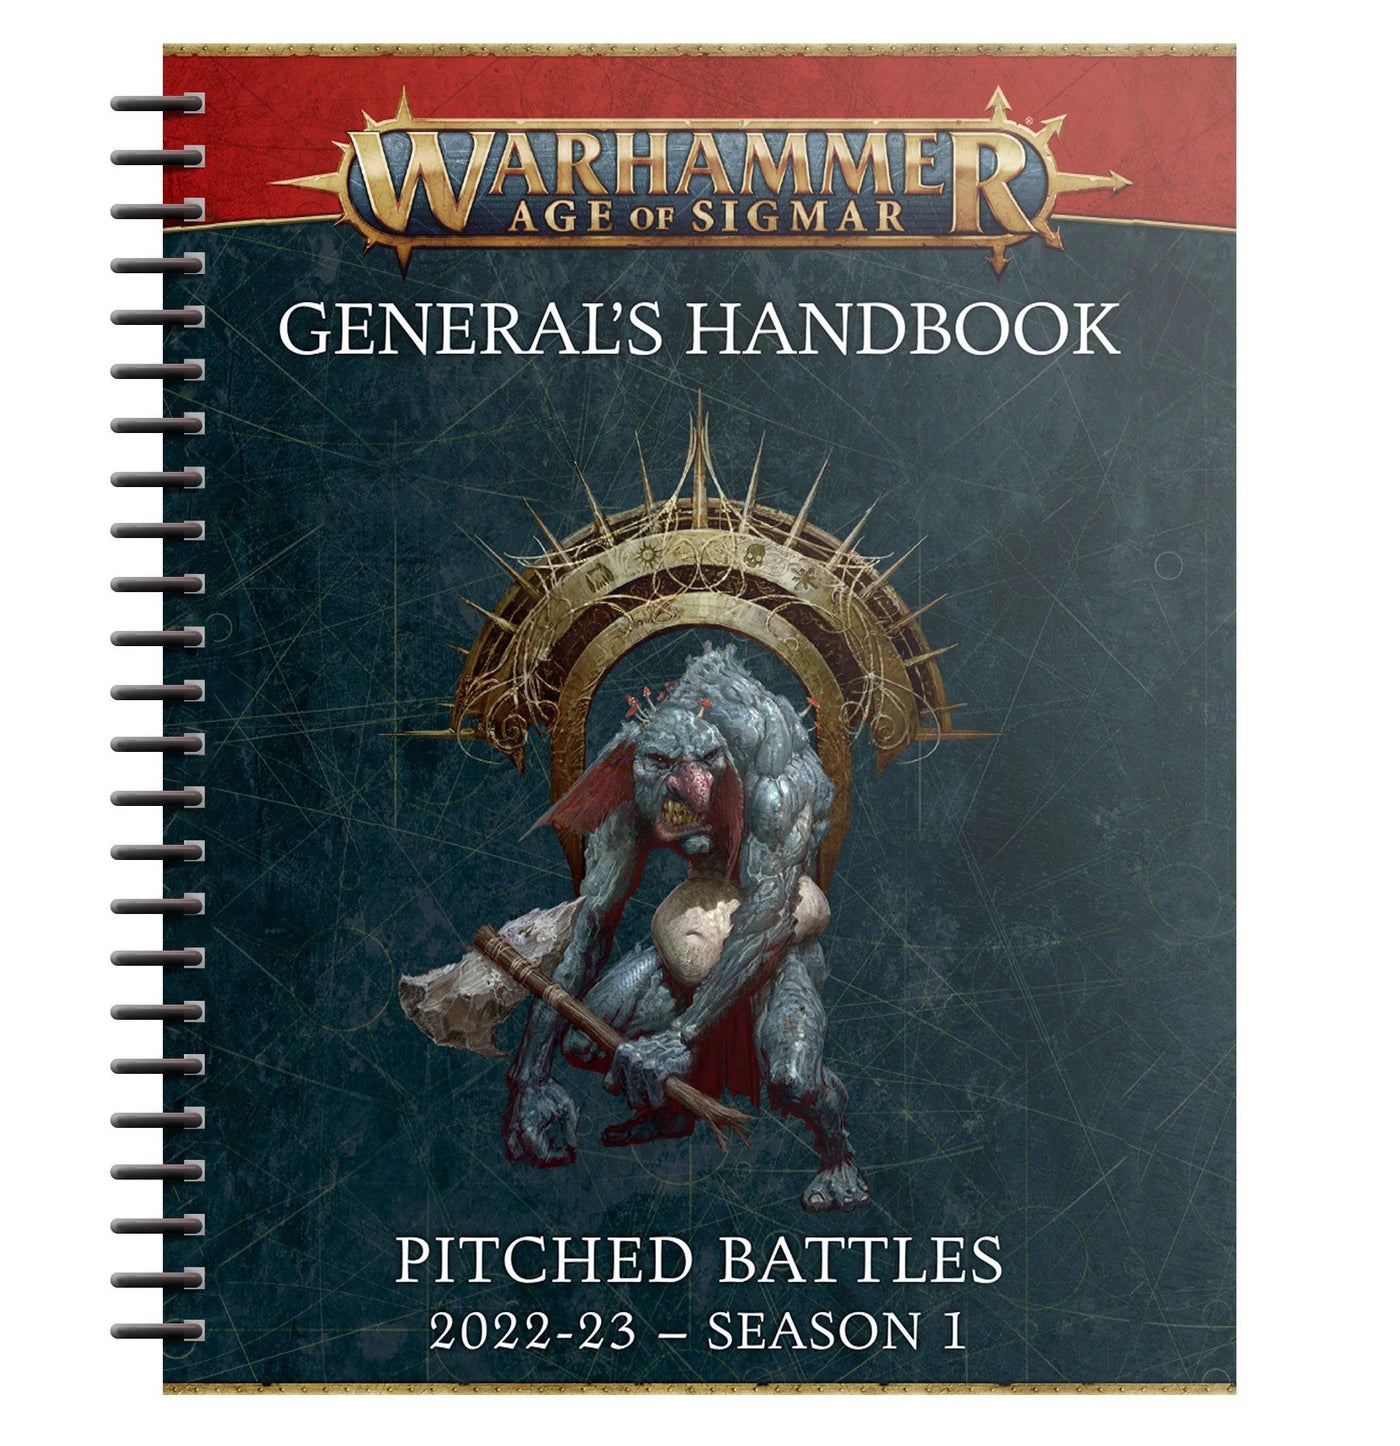 Warhammer: Age of Sigmar - General's Handbook Pitched Battles 2022-23 Season 1 and Pitched Battle Profiles